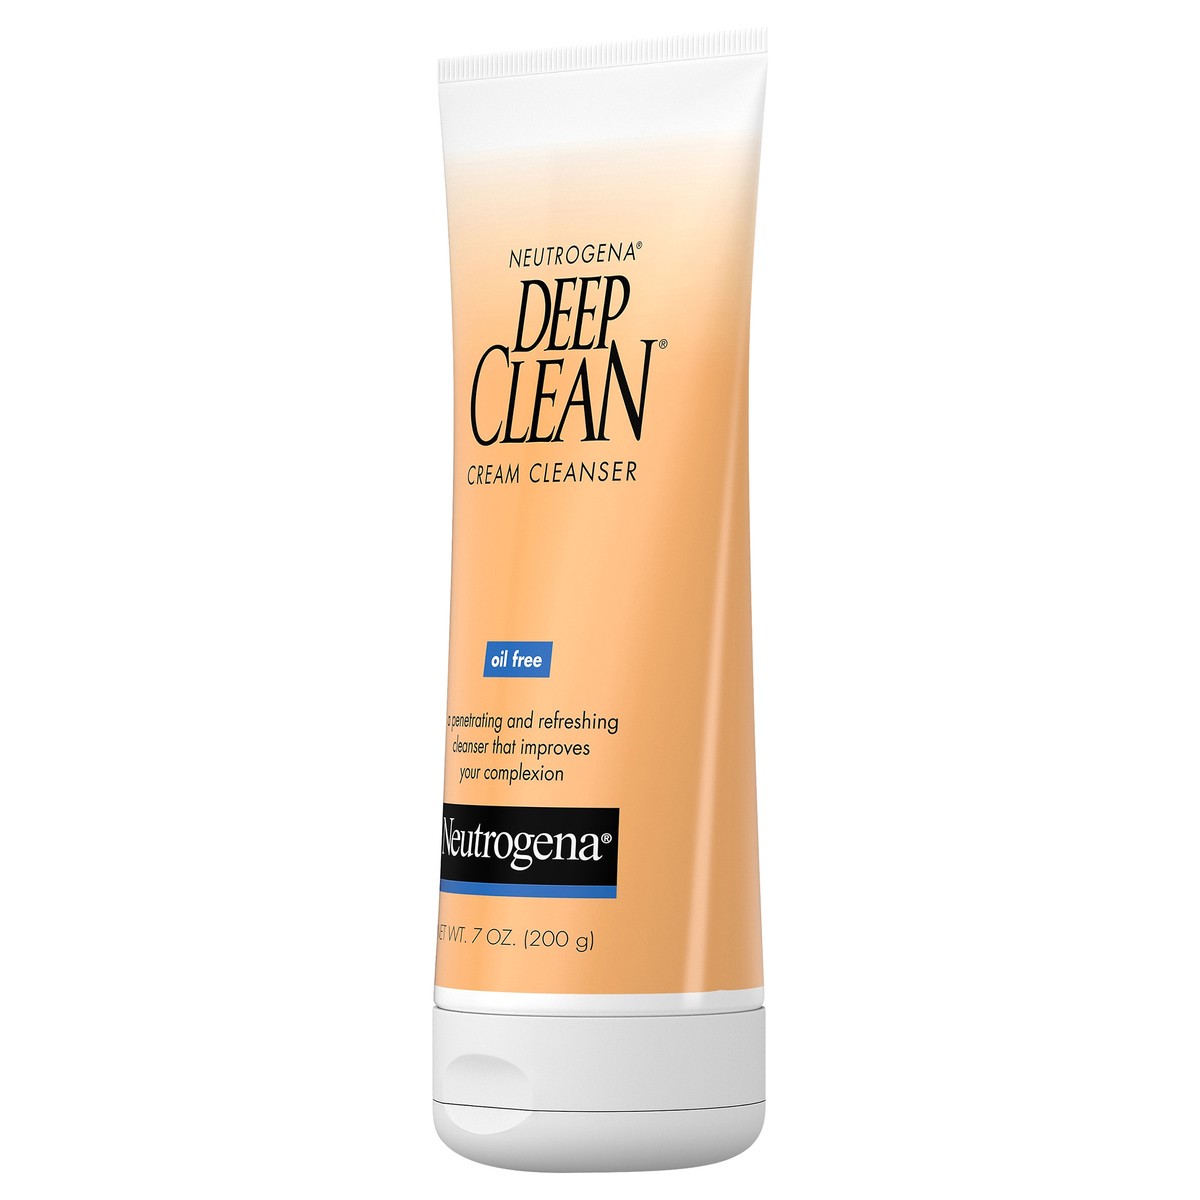 slide 6 of 7, Neutrogena Deep Clean Daily Facial Cream Cleanser with Beta Hydroxy Acid to Remove Dirt, Oil & Makeup, Alcohol-Free, Oil-Free & Non-Comedogenic, 7 fl. oz, 7 oz